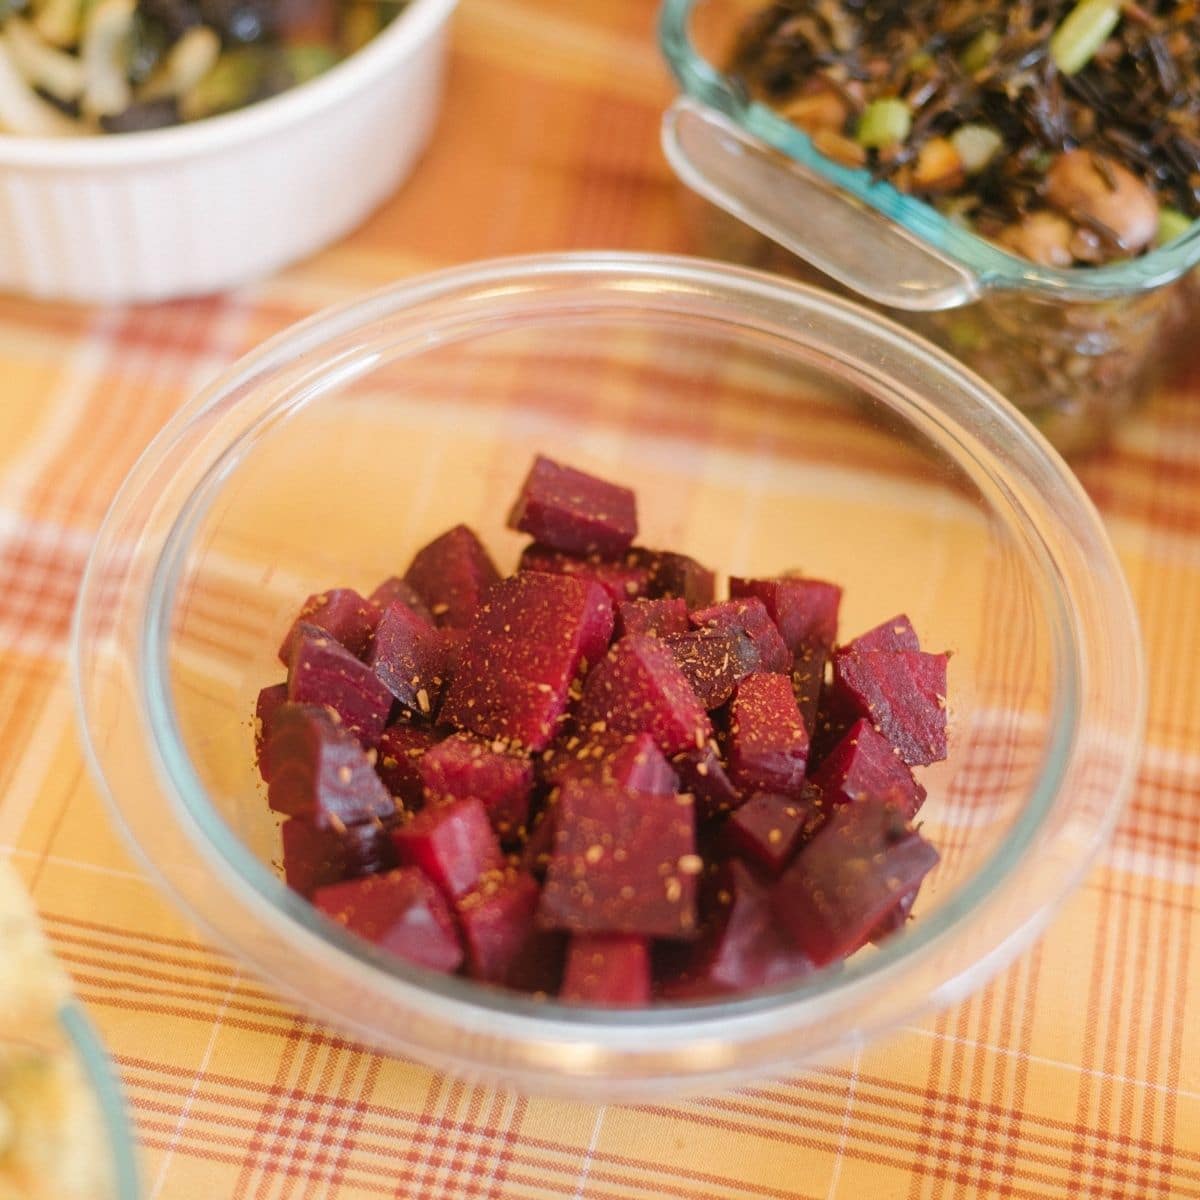 A bowl of roasted cinnamon beets on an autumnal patterned tablecloth